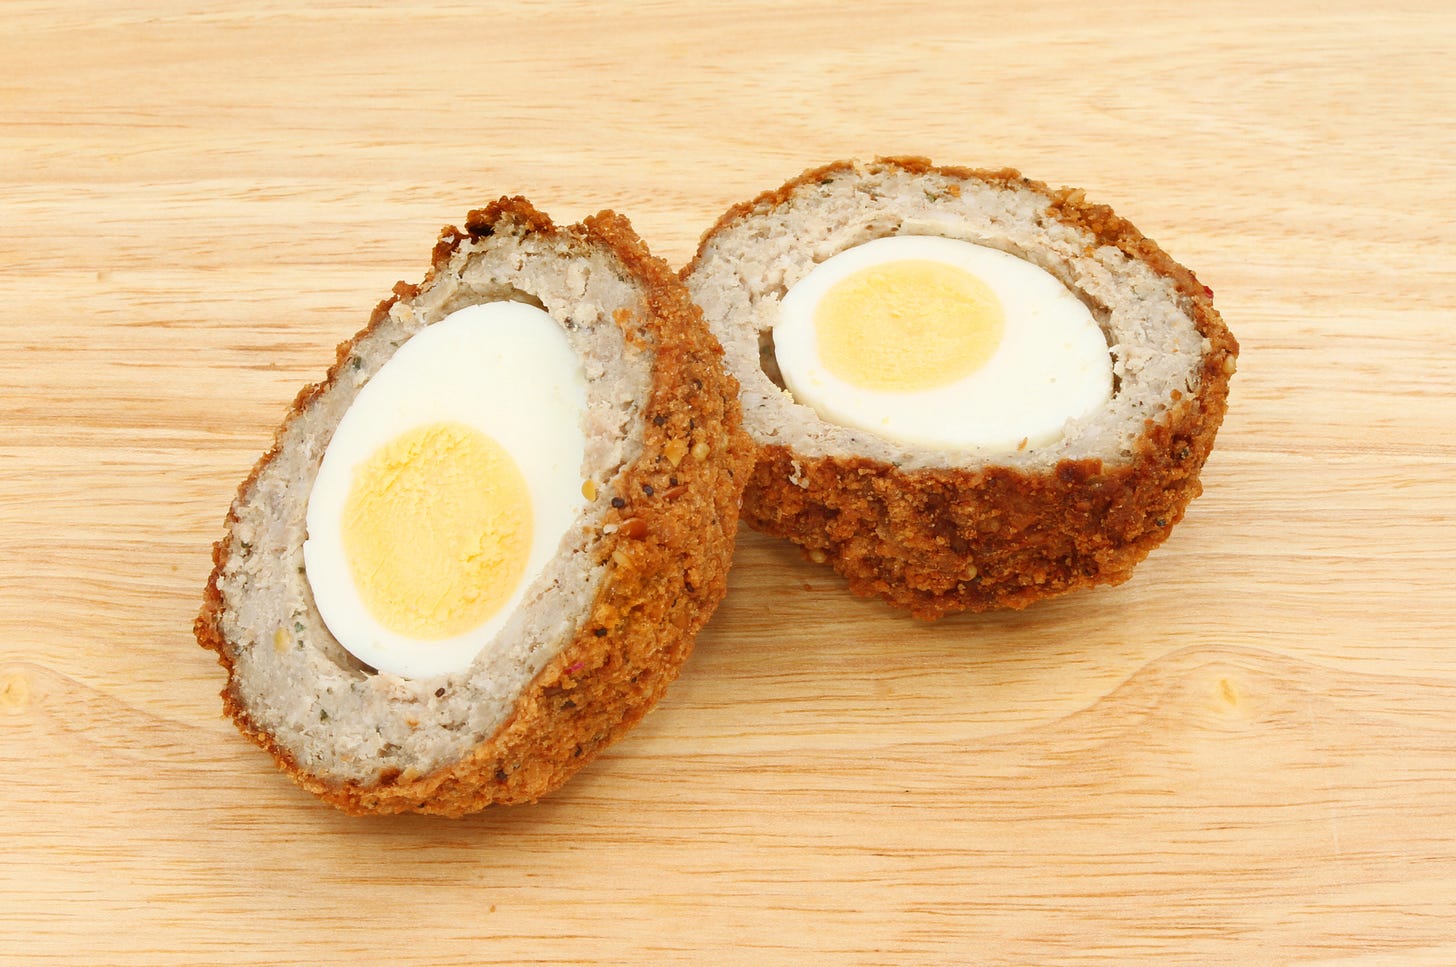 Scotch egg DOES count as a meal and people can stay at the pub to finish  their drinks in Tier 2, minister says